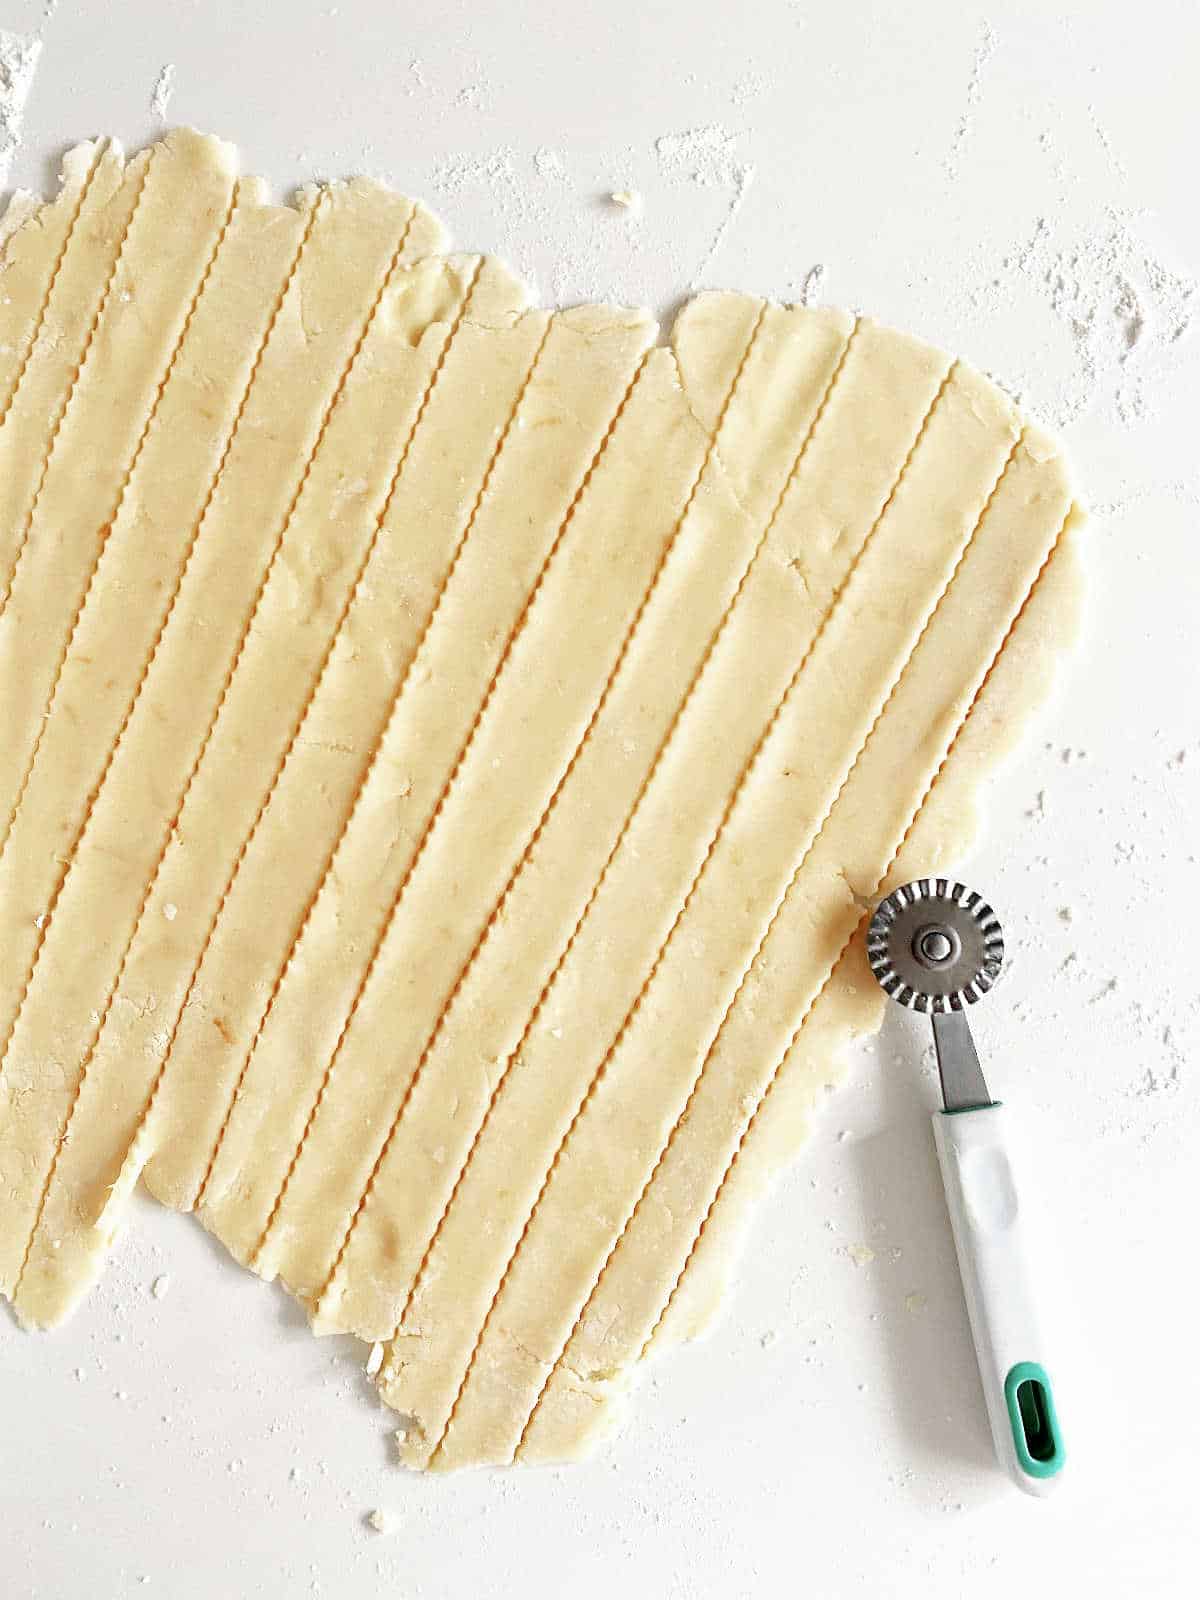 Strips of pie crust on a white surface with pizza cutter on top.